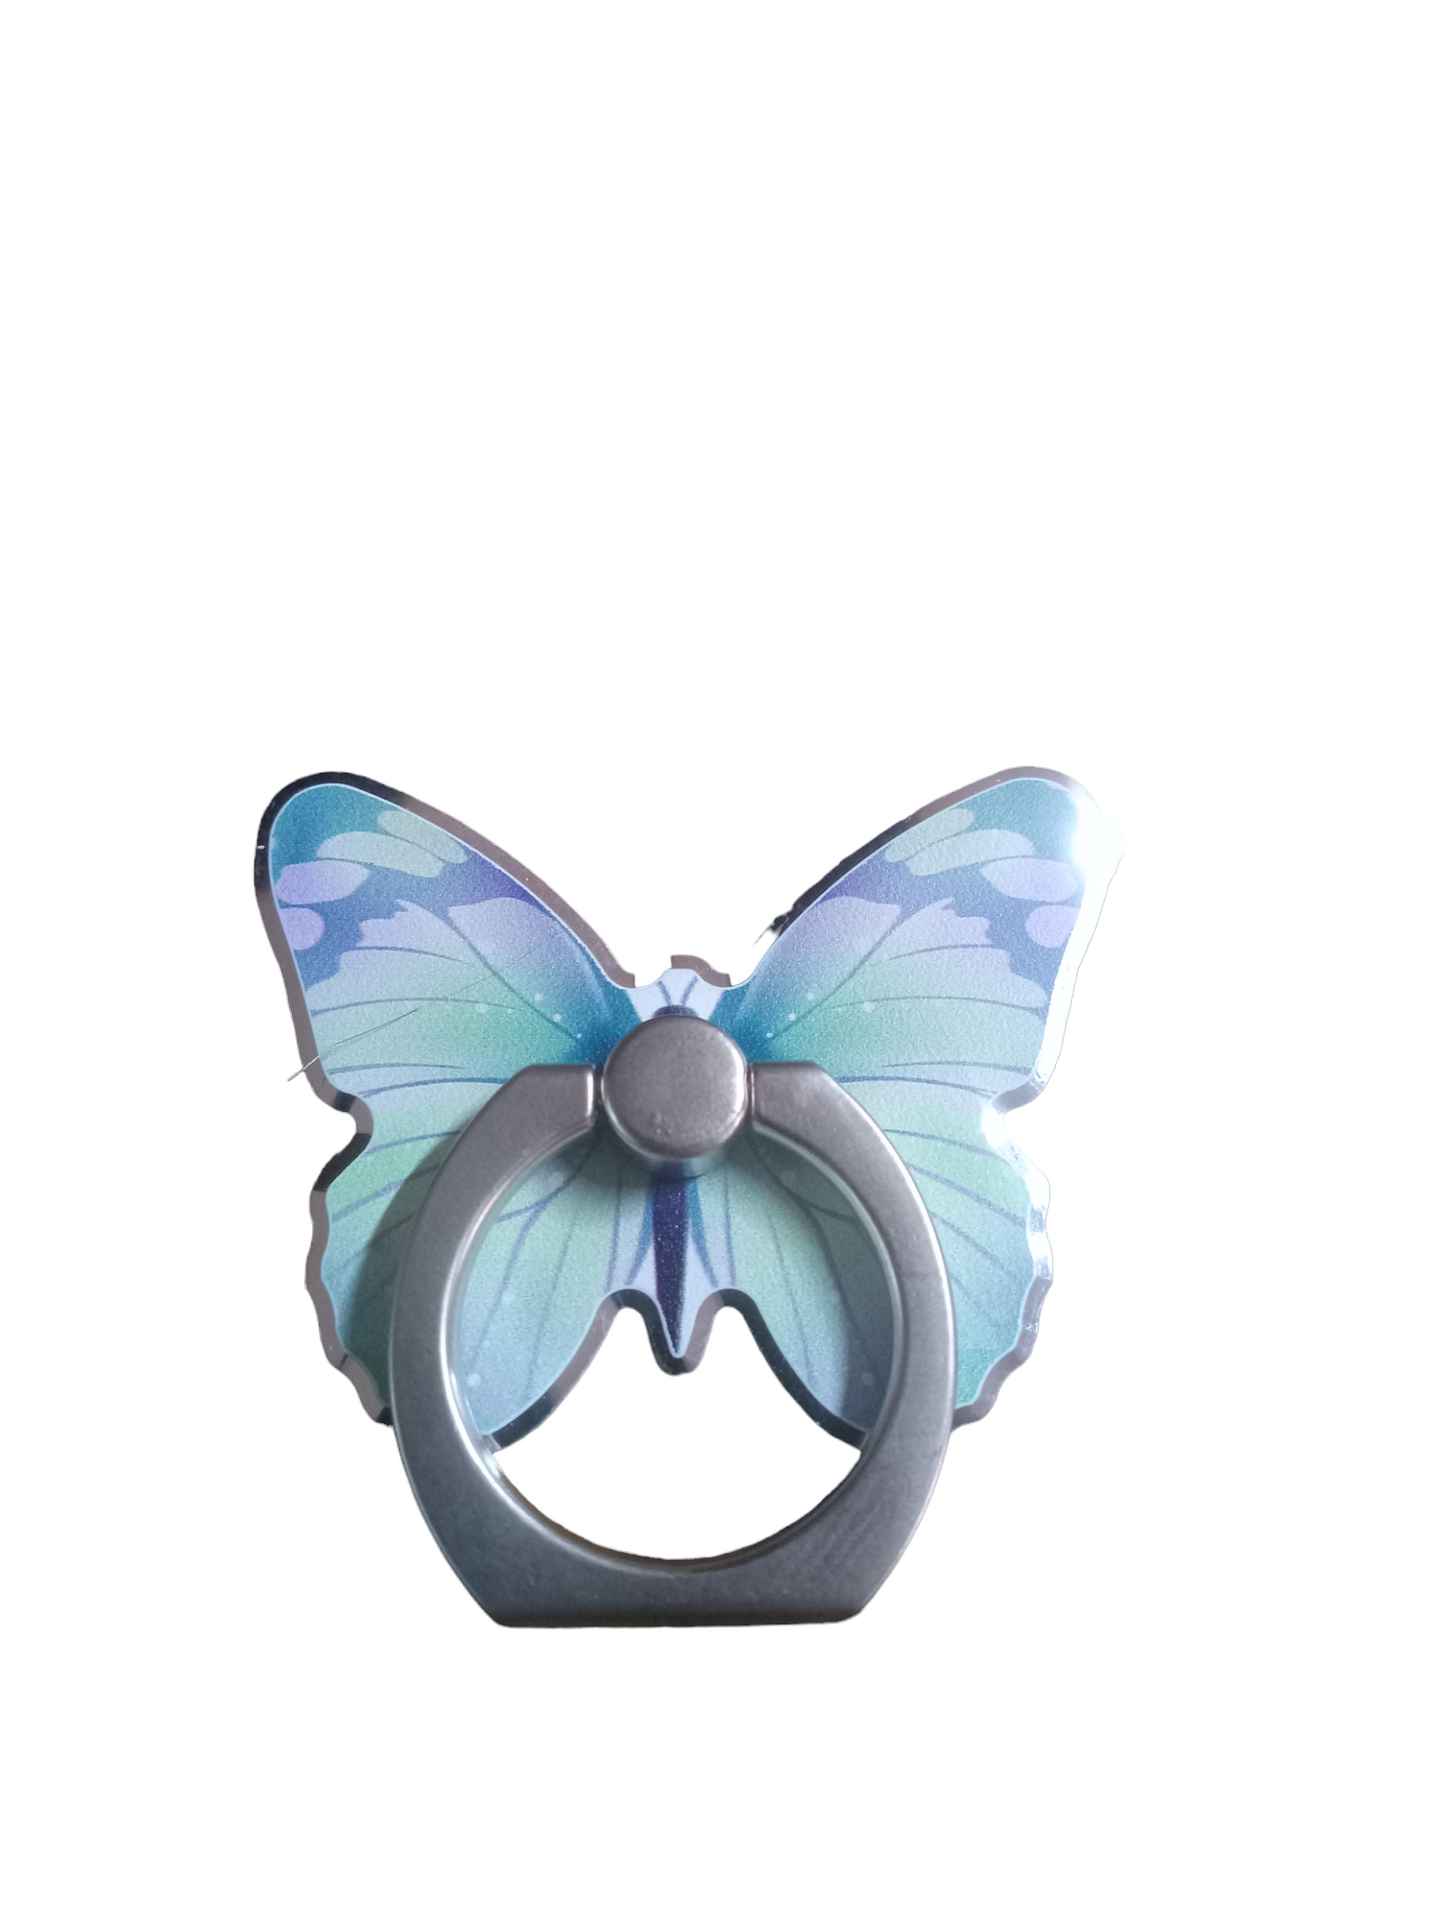 Colorful Butterfly Phone Holder Stand for Hands-Free Convenience